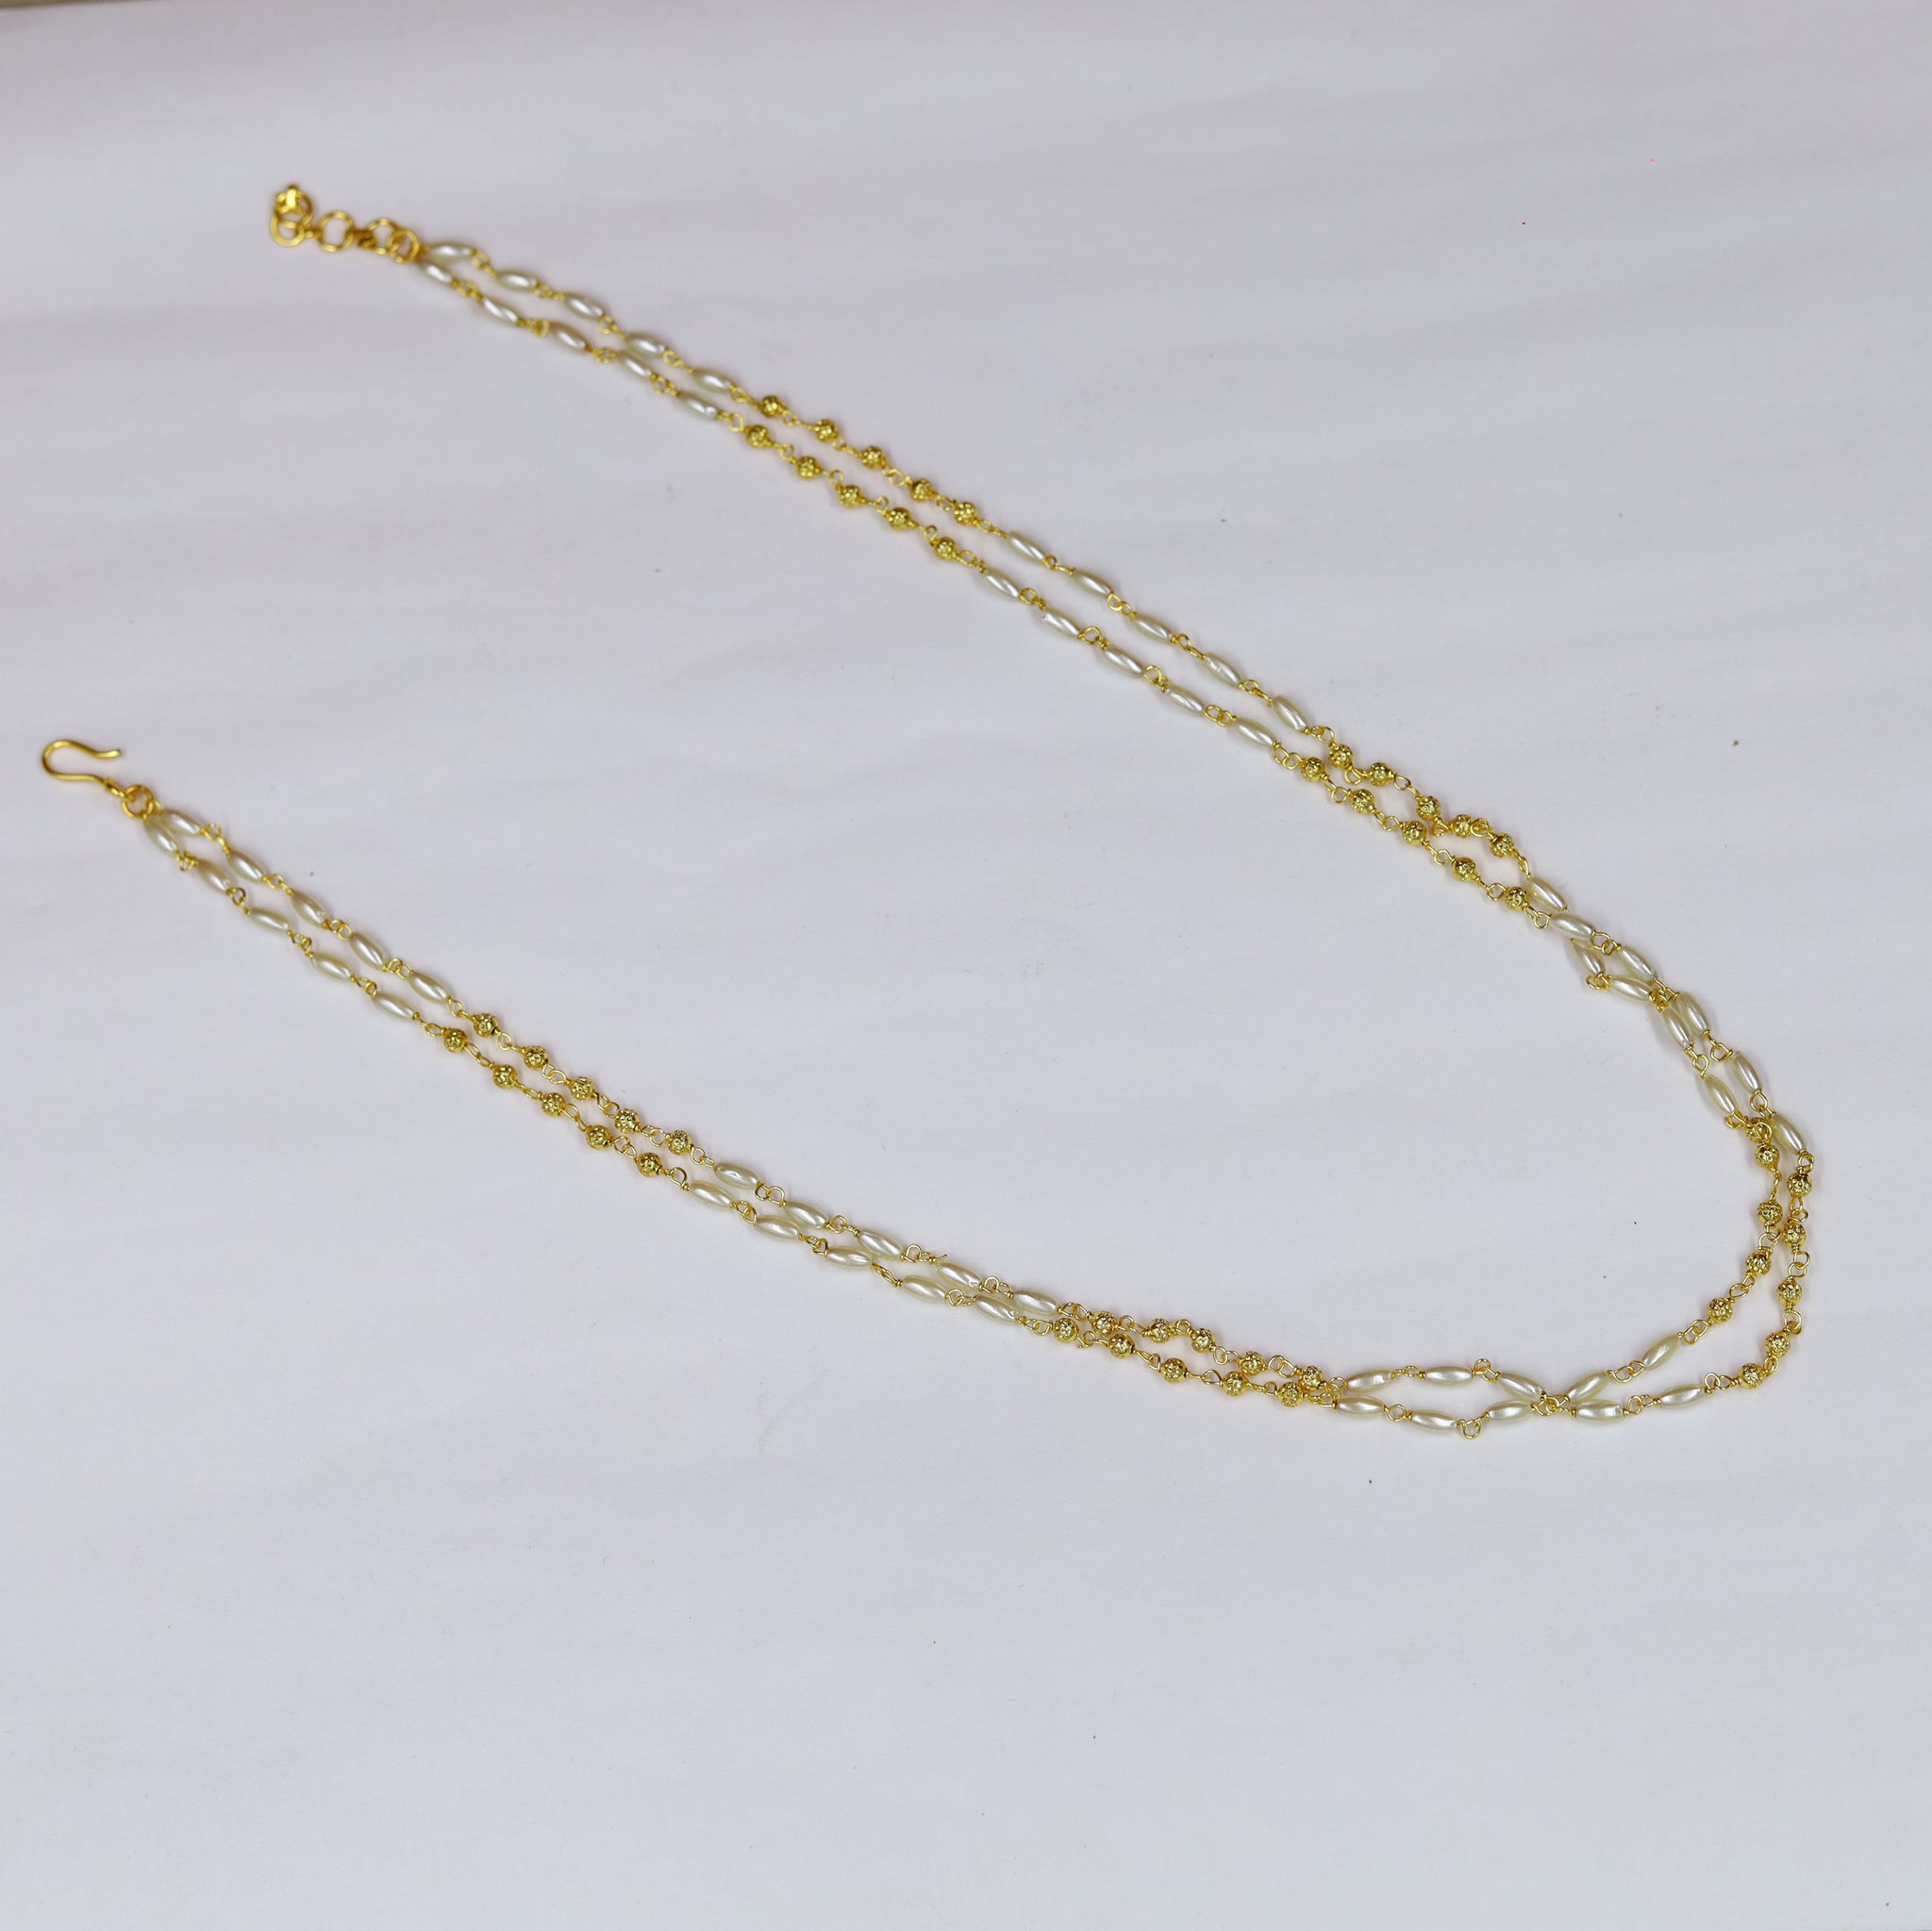 Gold Plated Pearl Necklace Set 13450-21